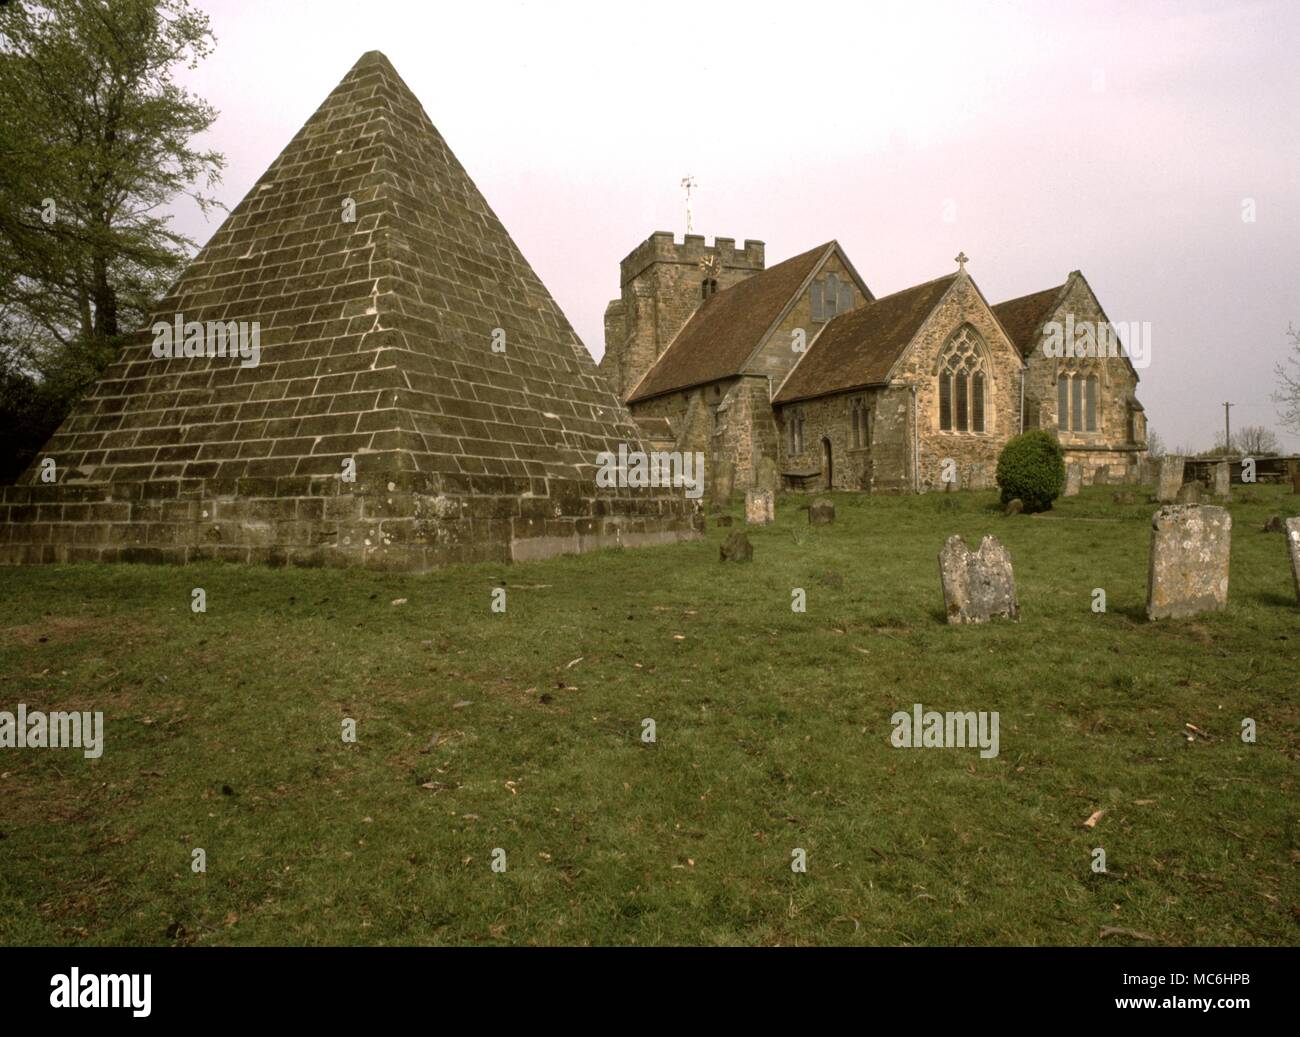 Pyramidology. The pyramid tomb of the eccentric MP, Squire 'Mad'' Jack Fuller, is in Brightling churchyard. ' Stock Photo